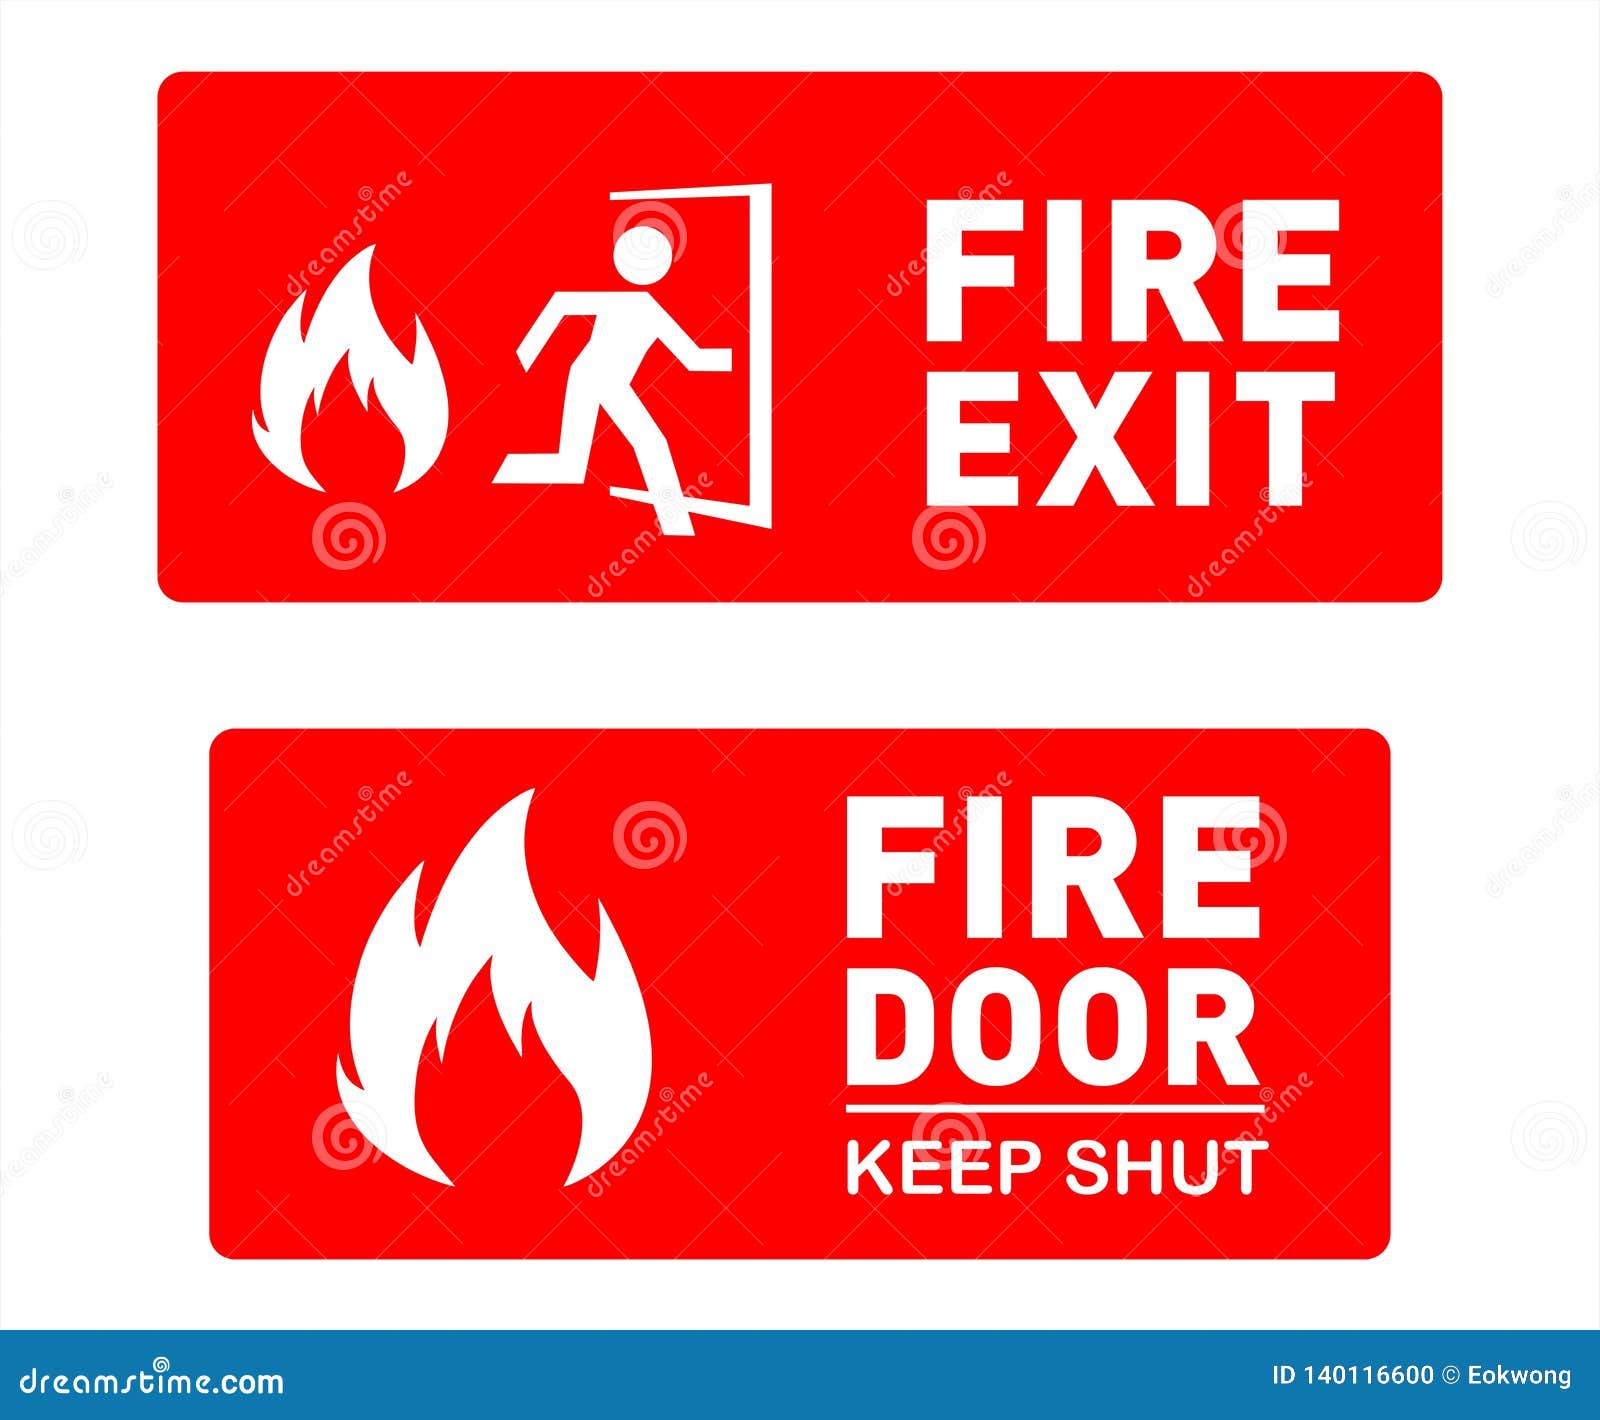 Free Printable Fire Safety Signs - FREE PRINTABLE TEMPLATES